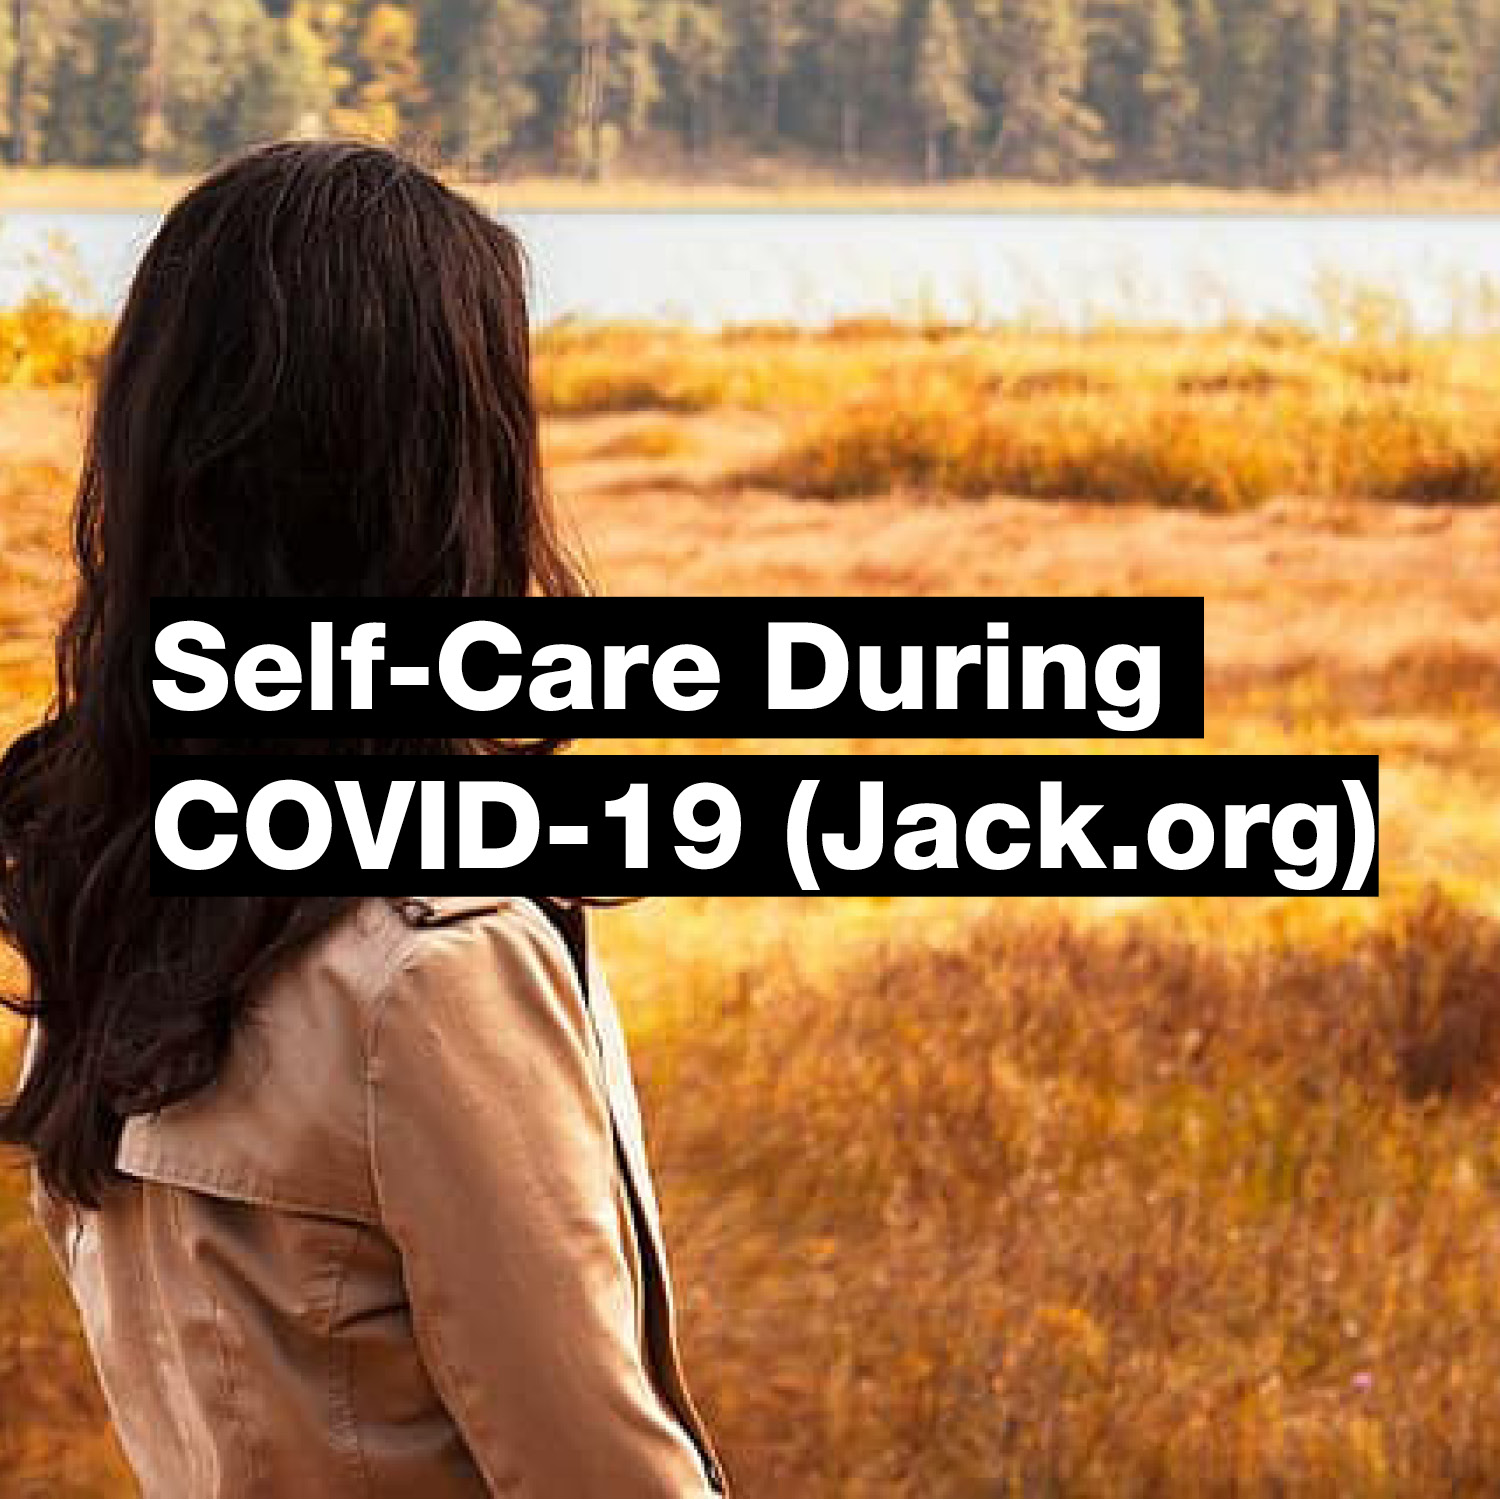 Self-Care During COVID-19 (Jack.org)